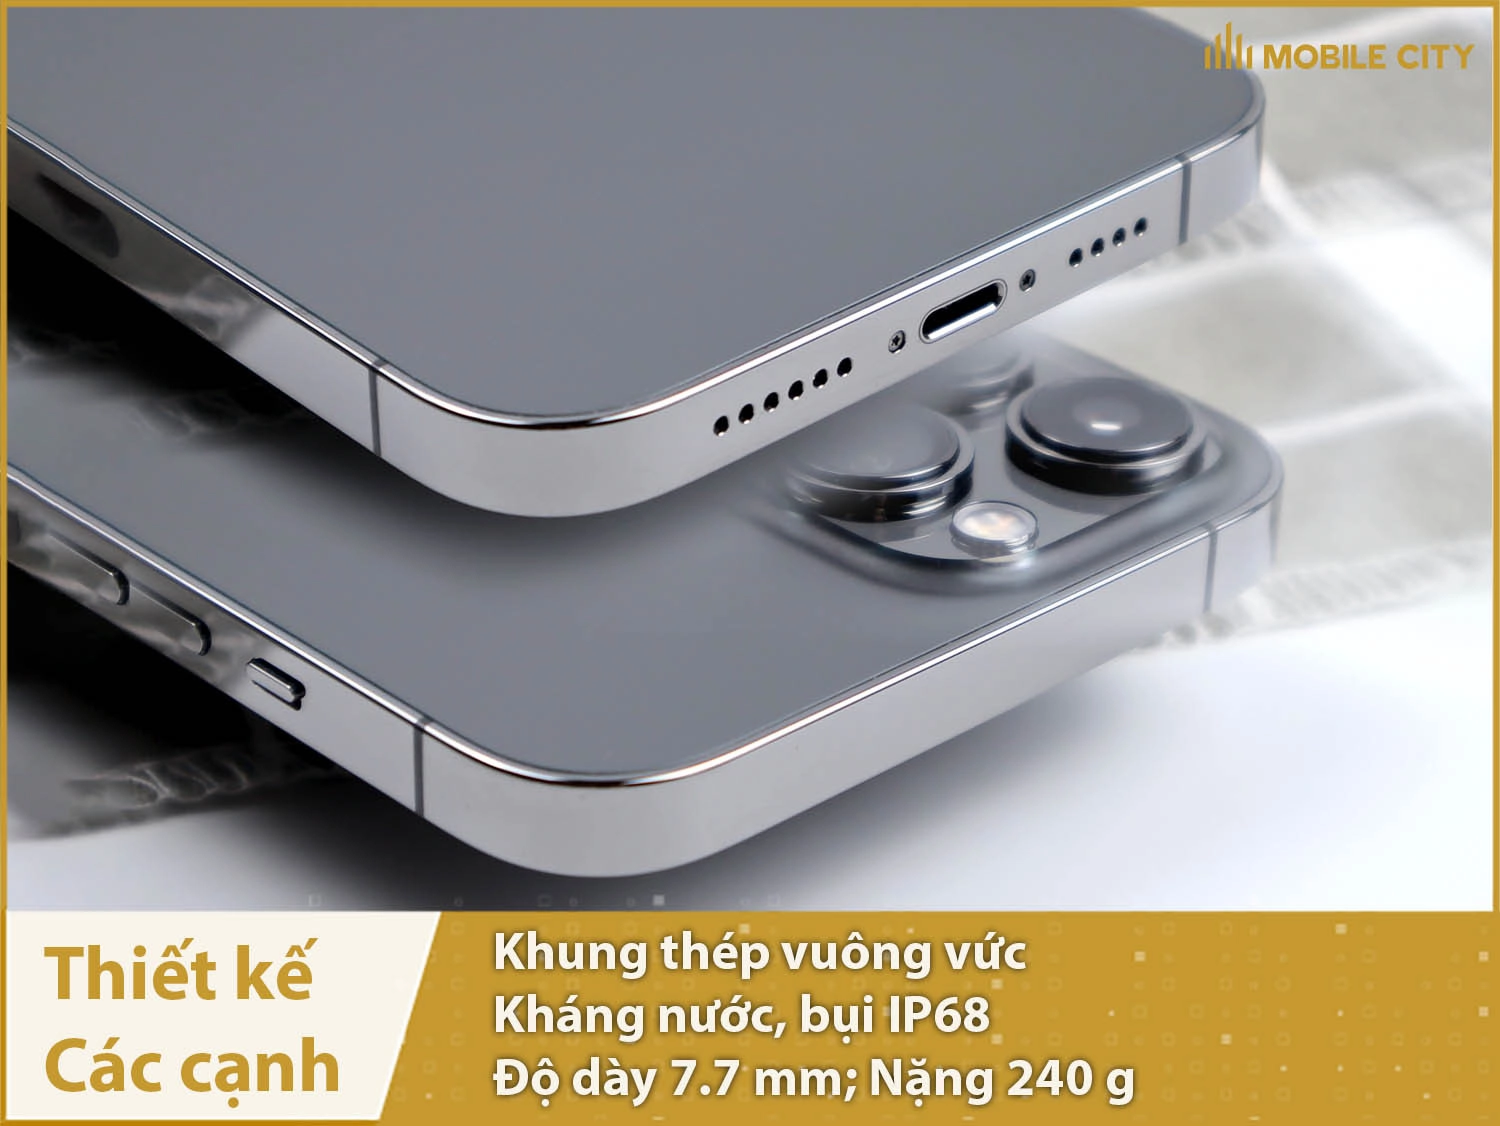 iphone-13-pro-max-old-danh-gia-canh